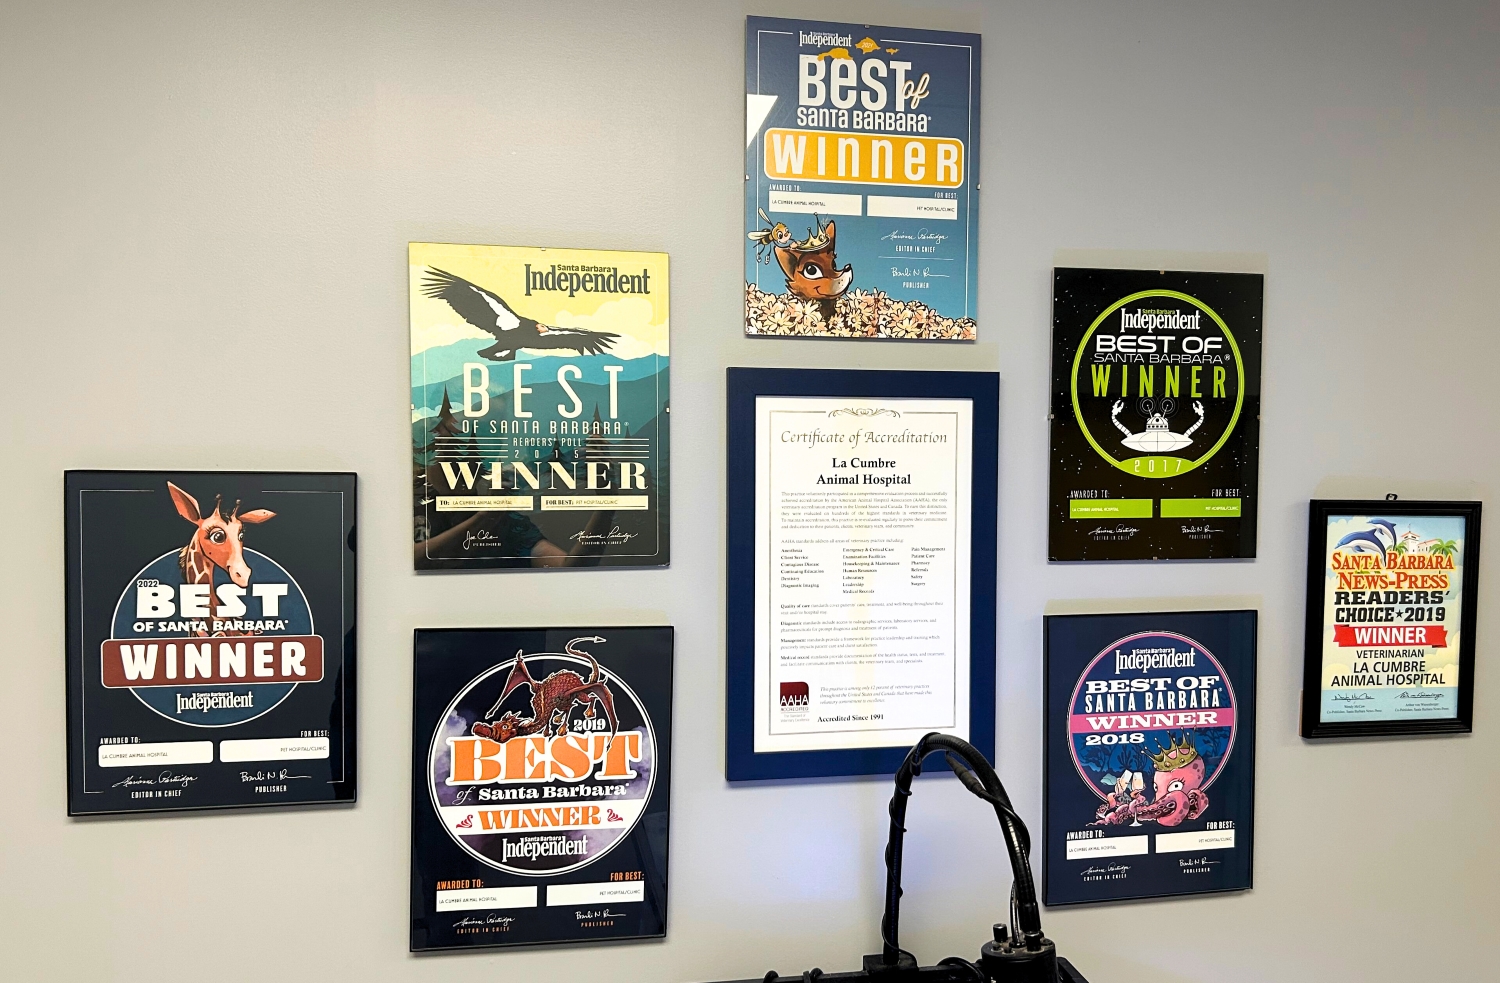 Wall of local awards and accreditations given to LCAH.